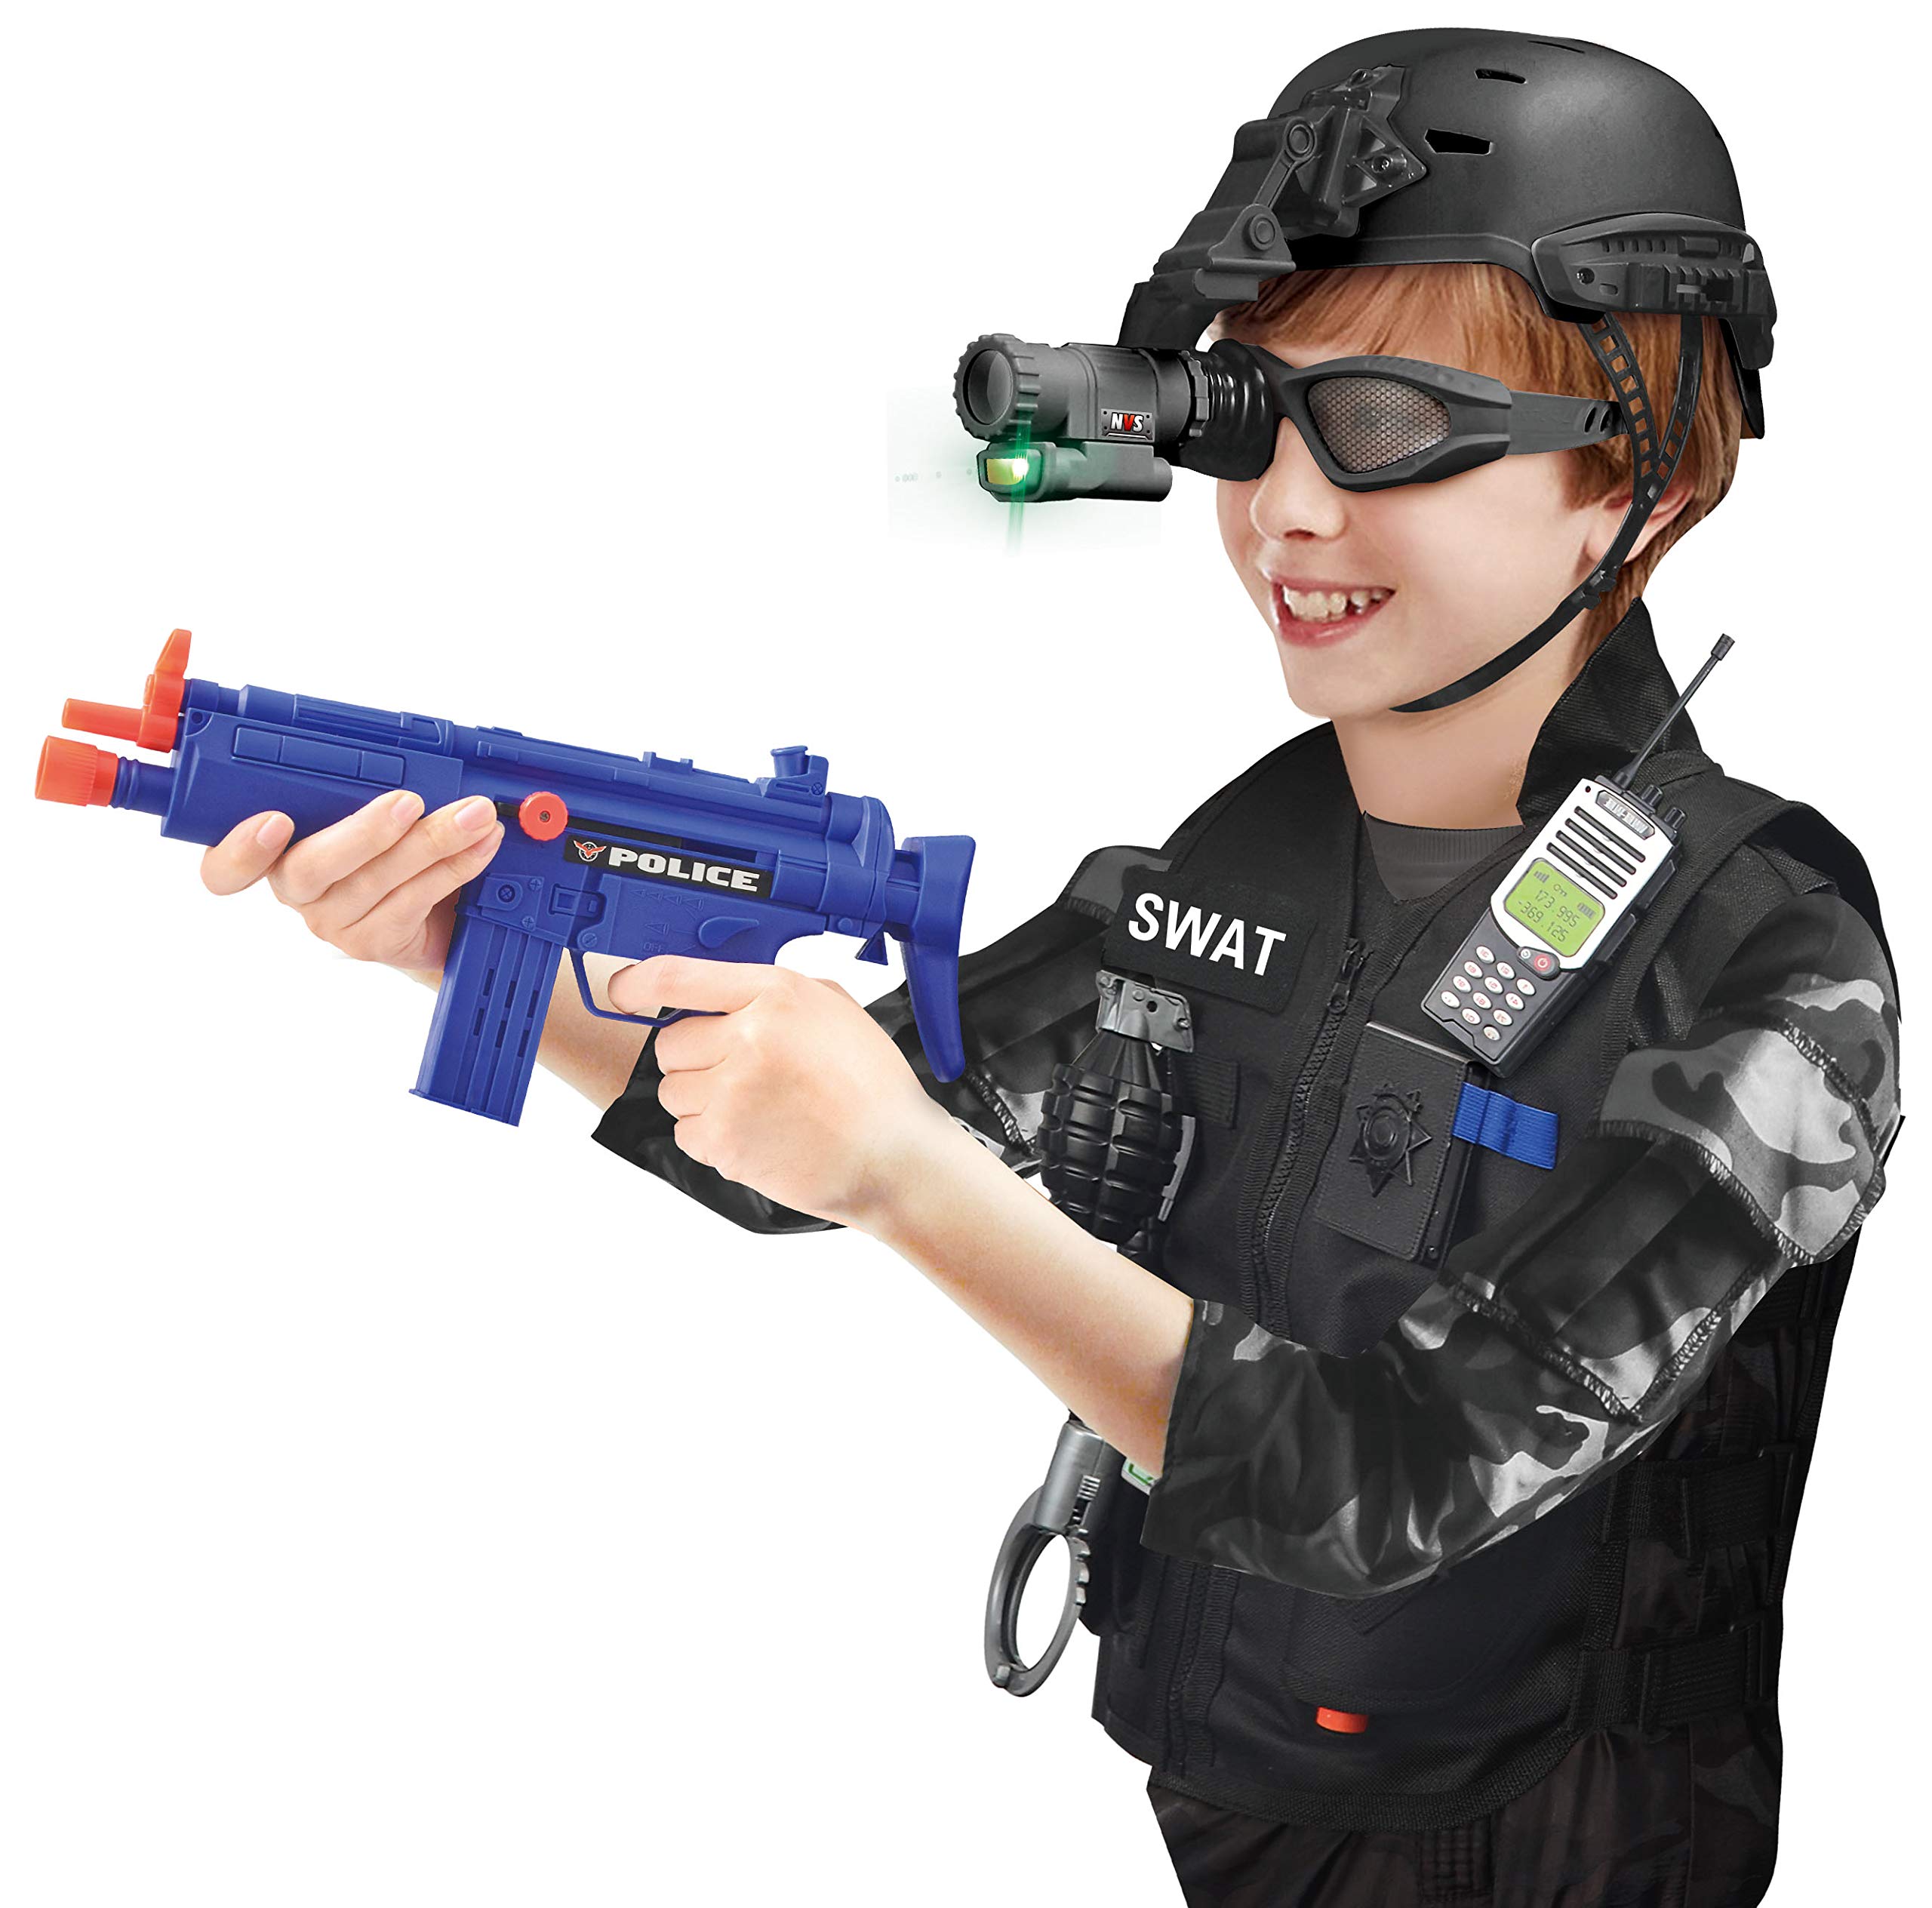 Liberty Imports Kids S.W.A.T. Police Officer Costume Deluxe Dress Up Role Play Set with Helmet, Night Vision Monocular, Guns, Accessories (12 Pcs)